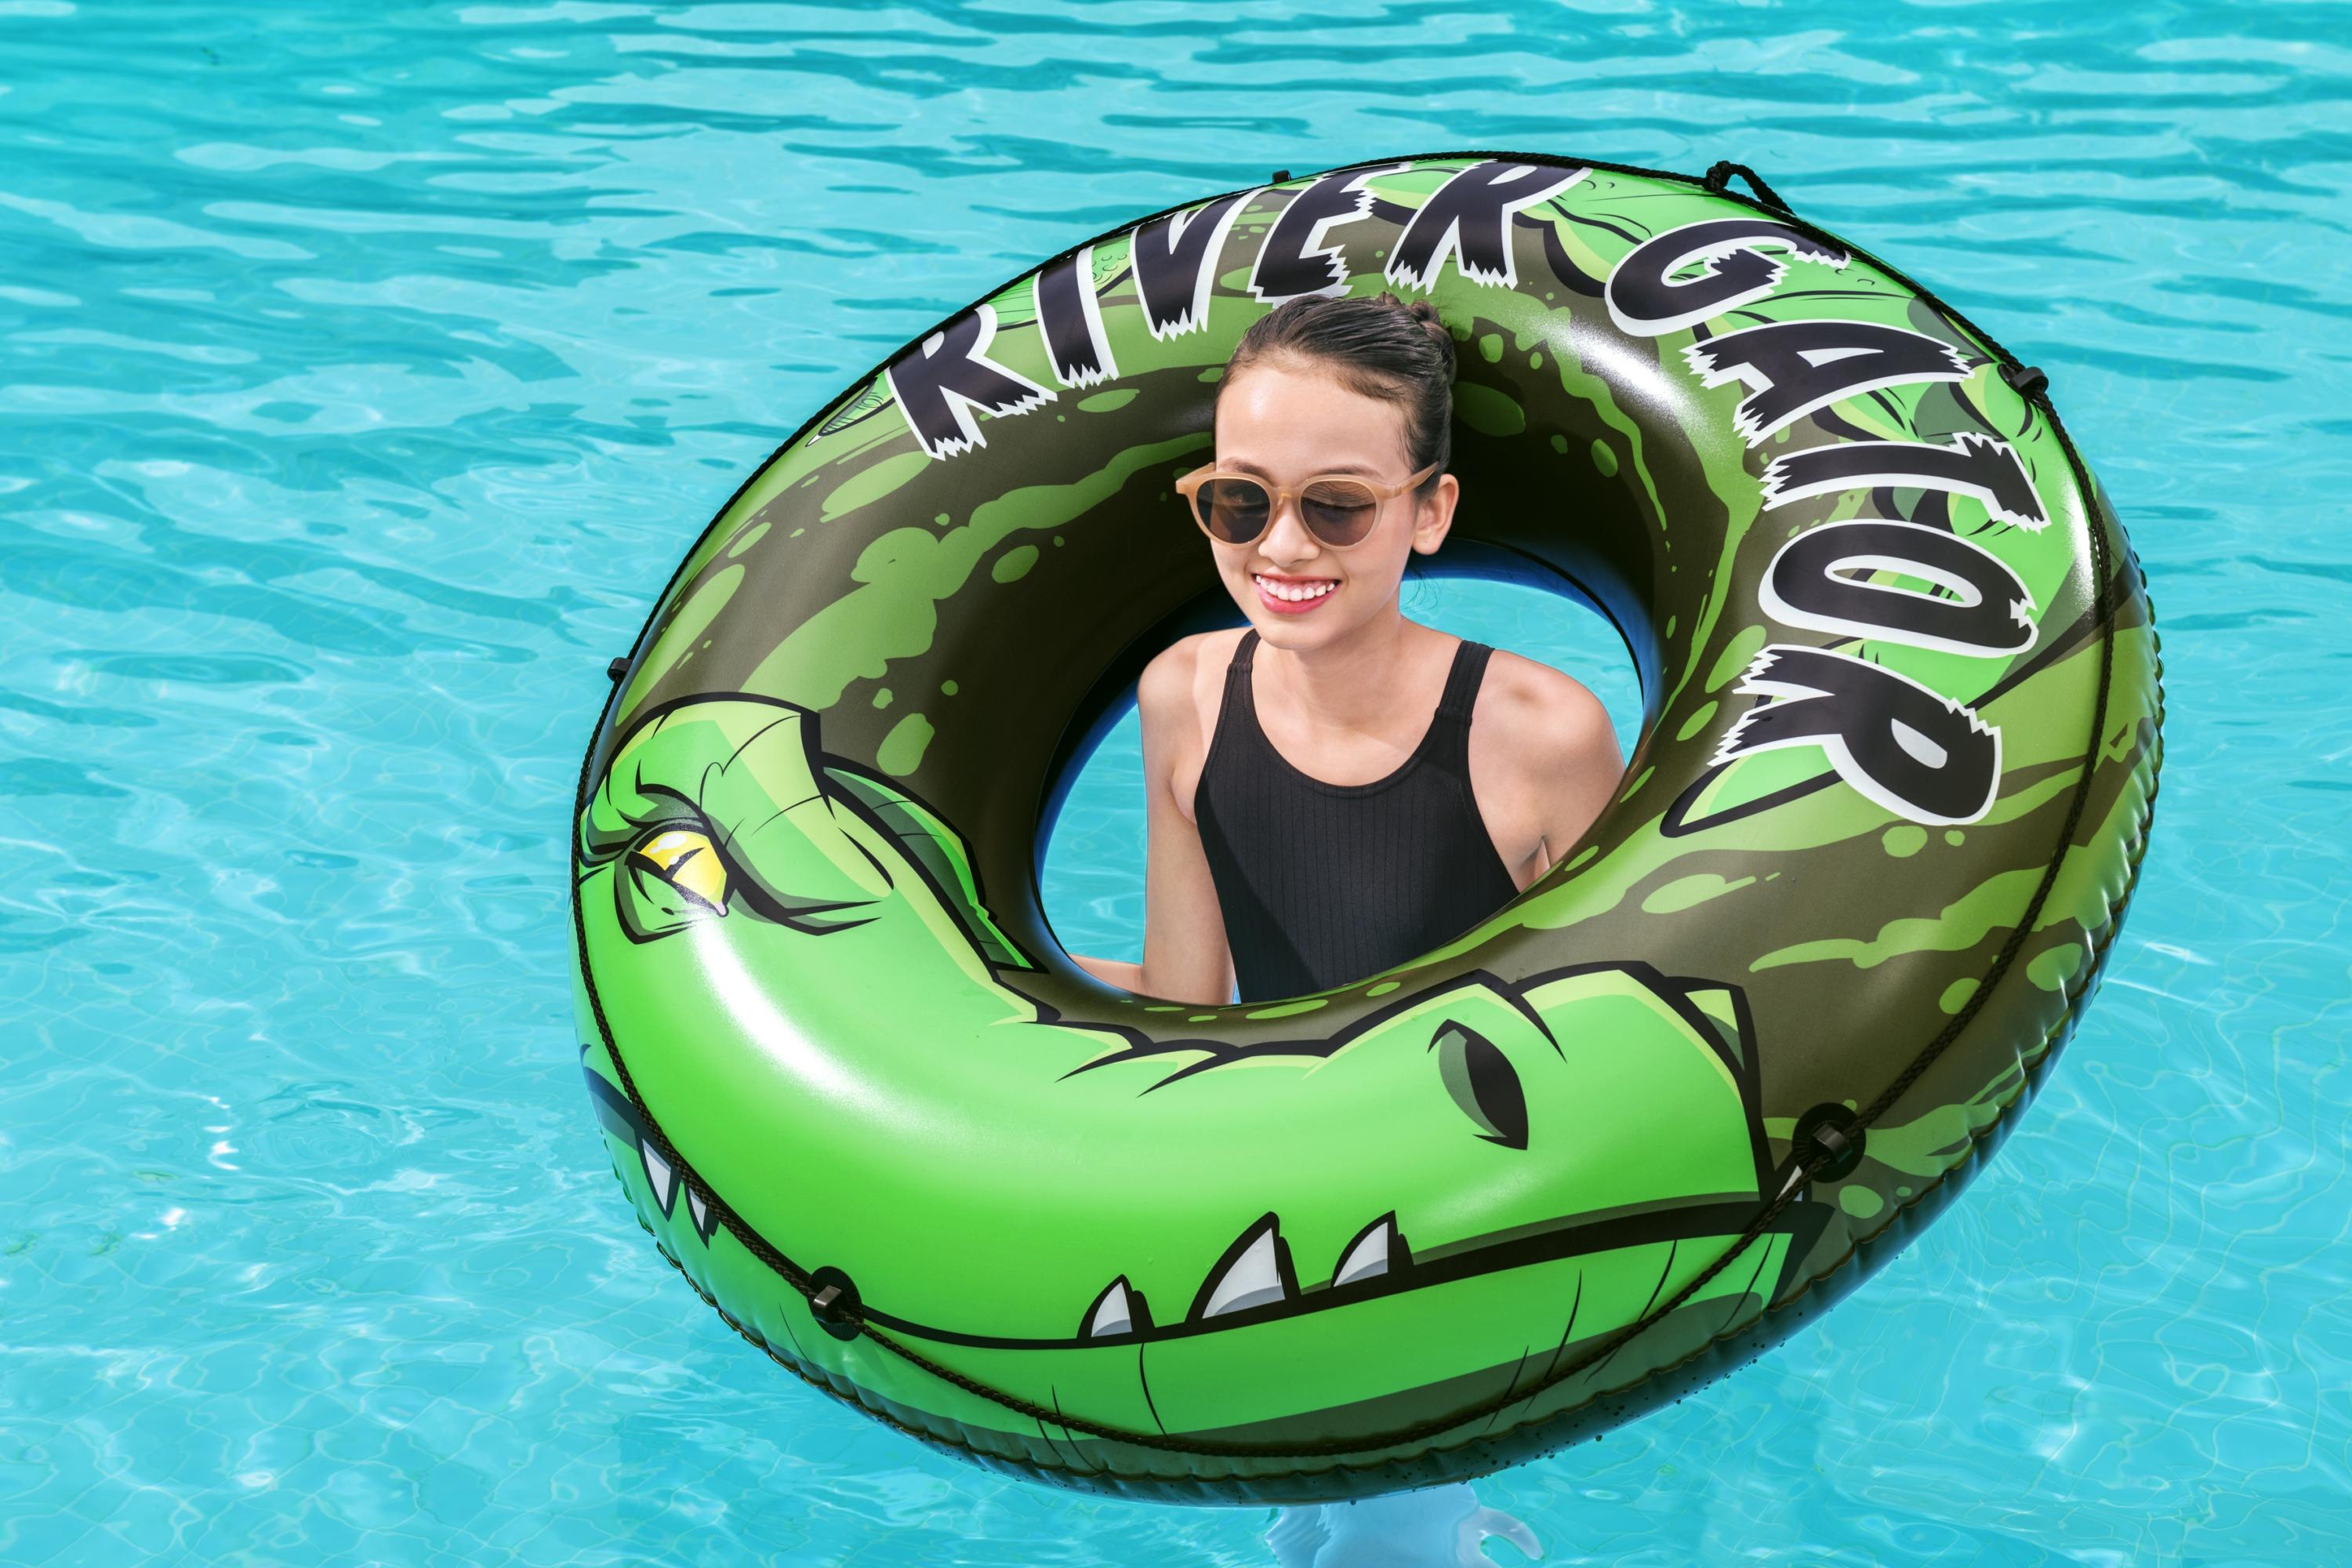 H2OGO! Green River Gator 47" Pool Ring Float with Grab Rope, Adult Unisex - image 6 of 9